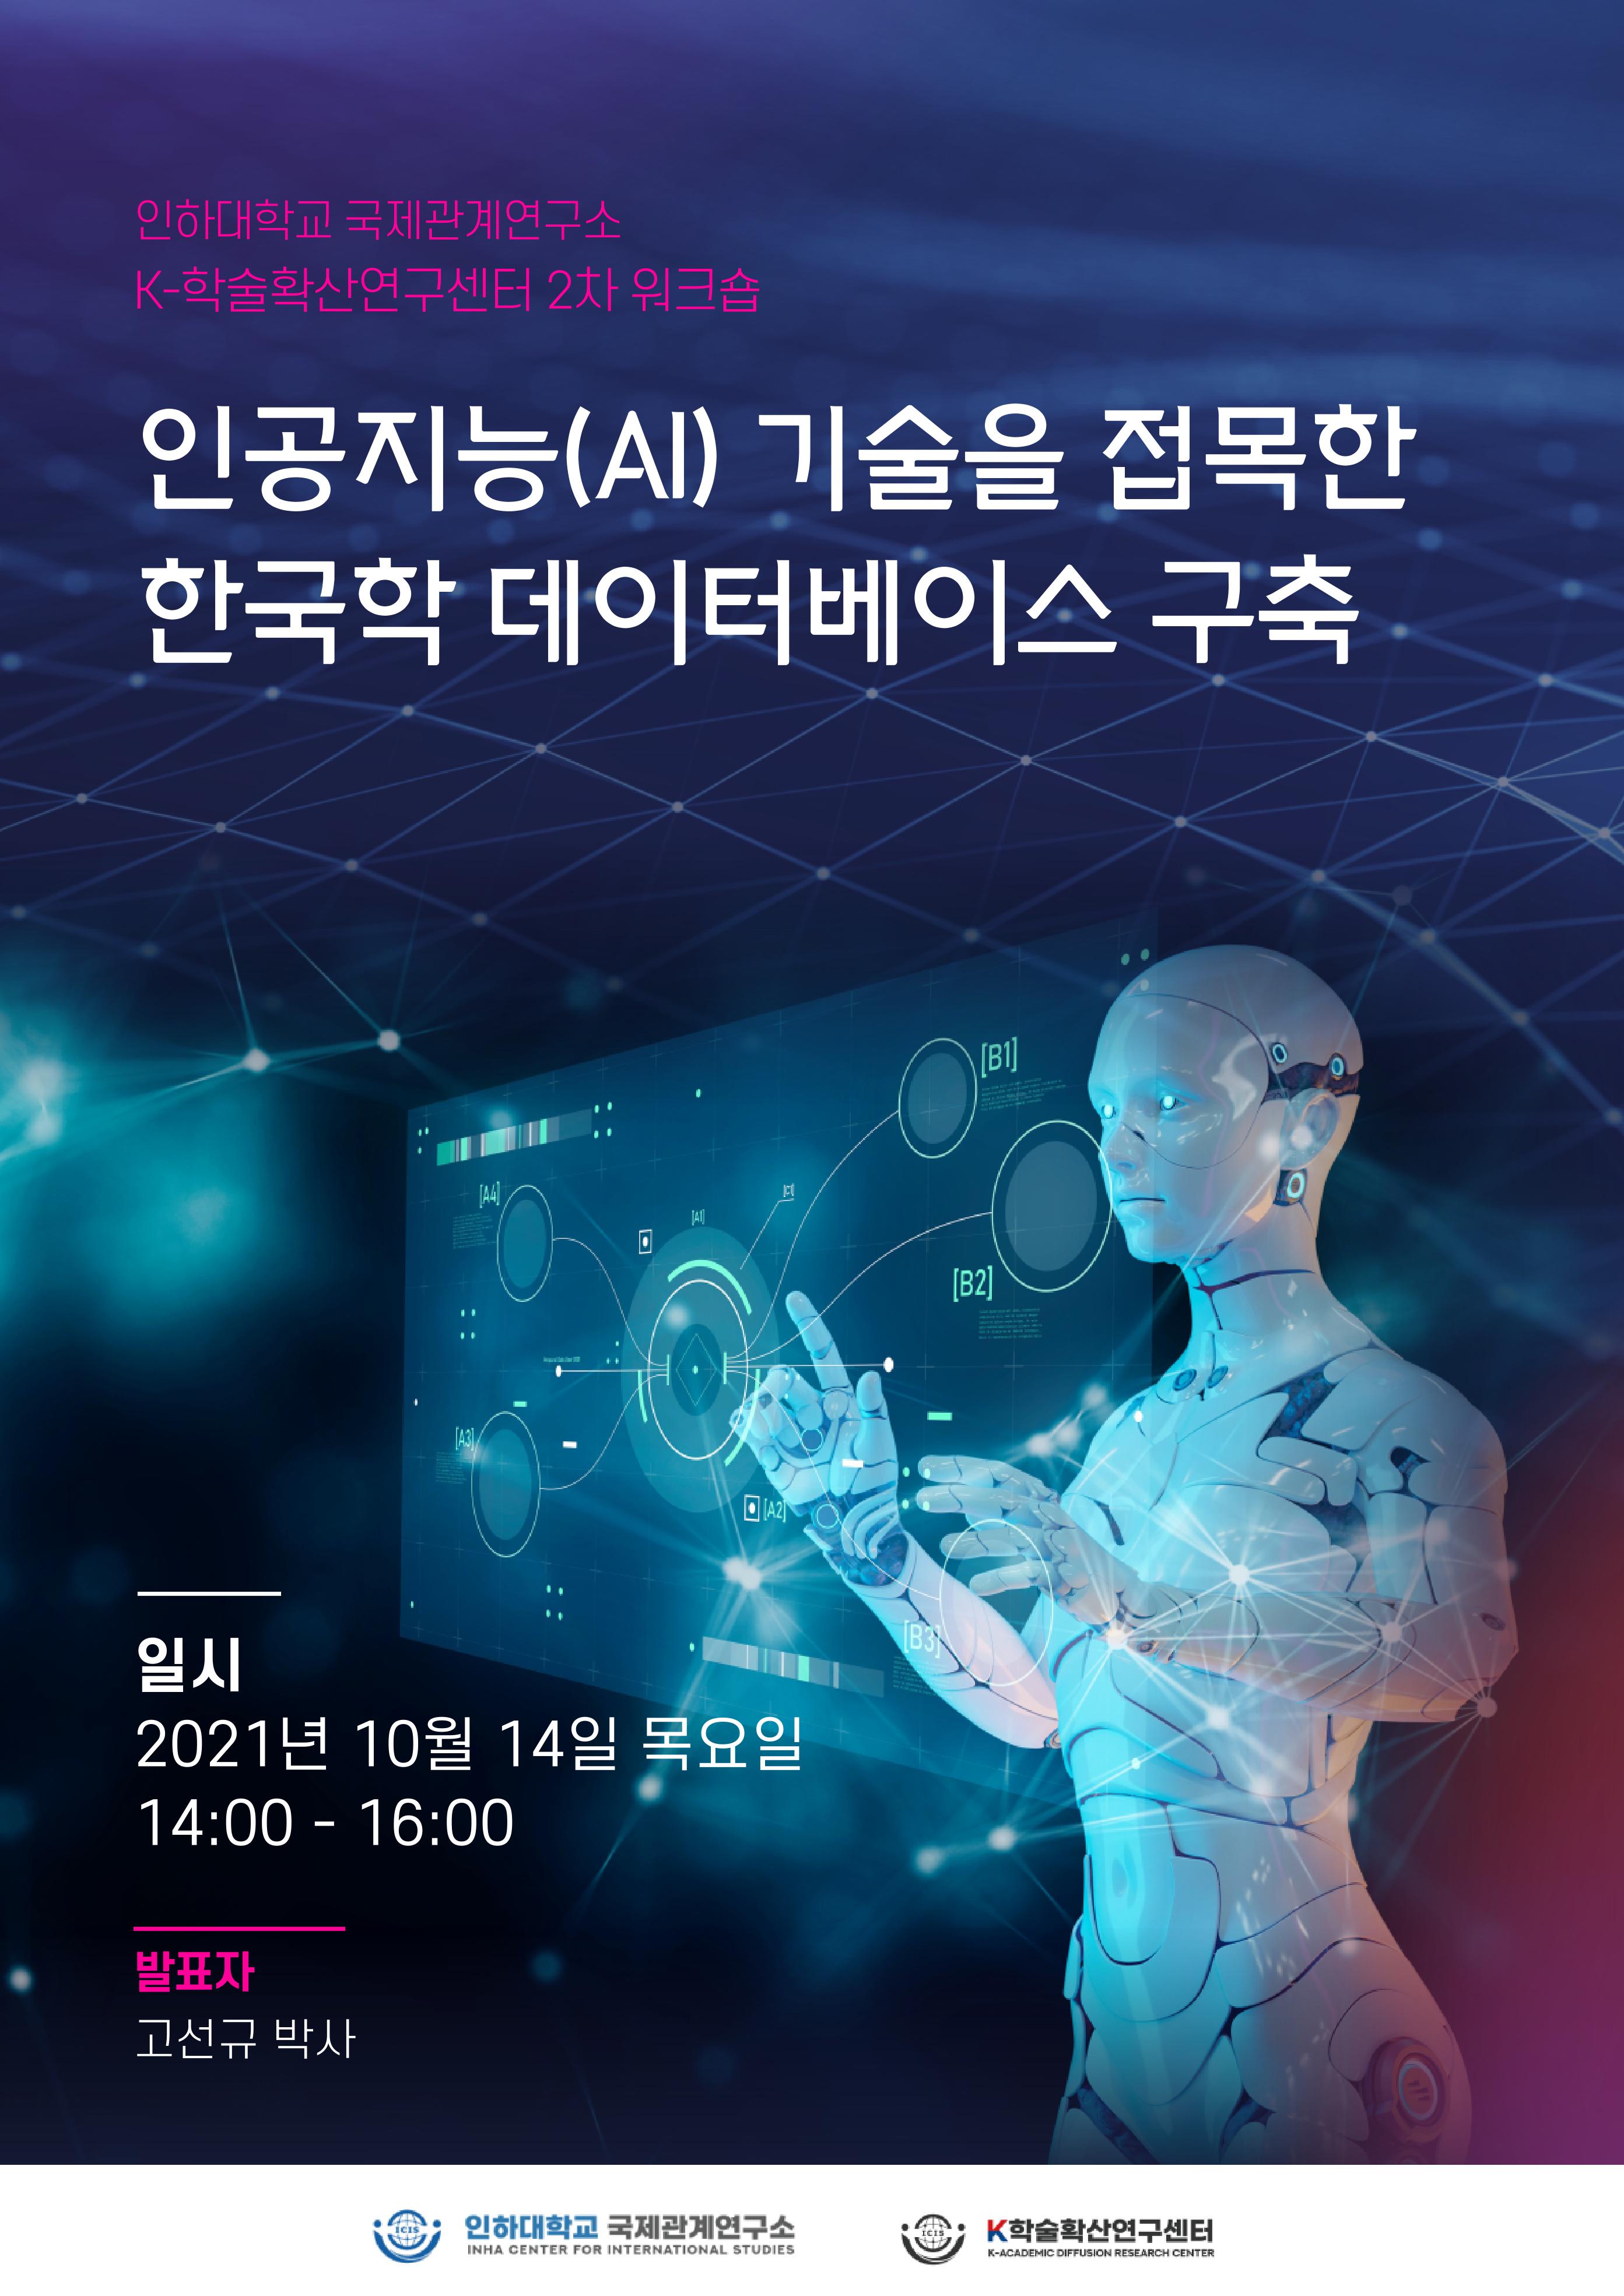 Building a Korean Studies Database Incorporating Artificial Intelligence (AI) Technology                                 썸네일